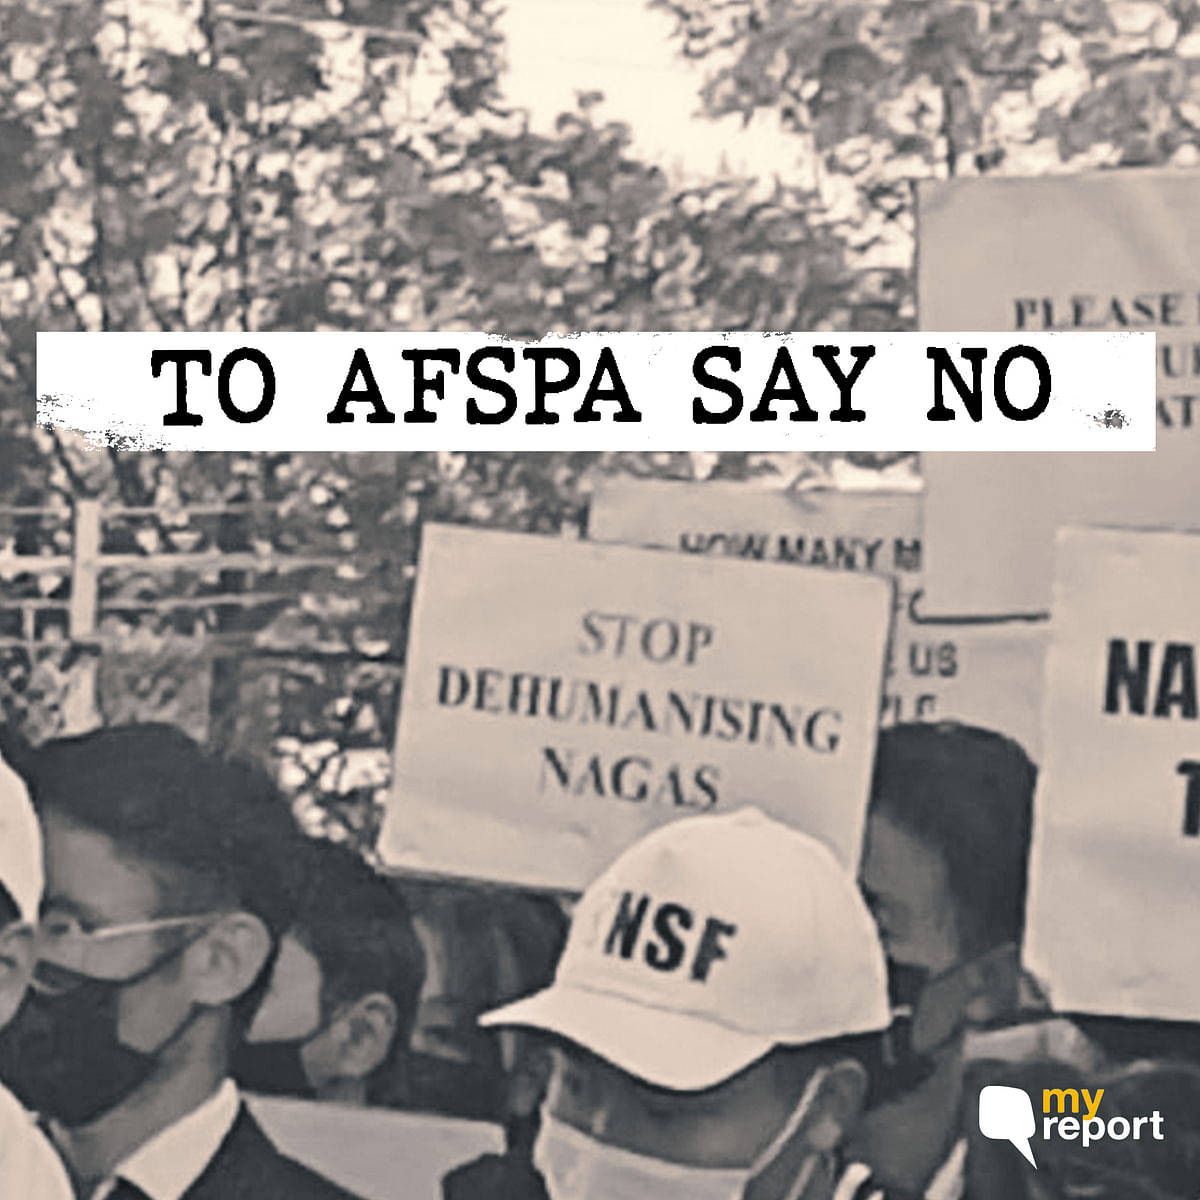 Dear People of Nagaland, Here’s My Poem Echoing Your Demand To Repeal AFSPA